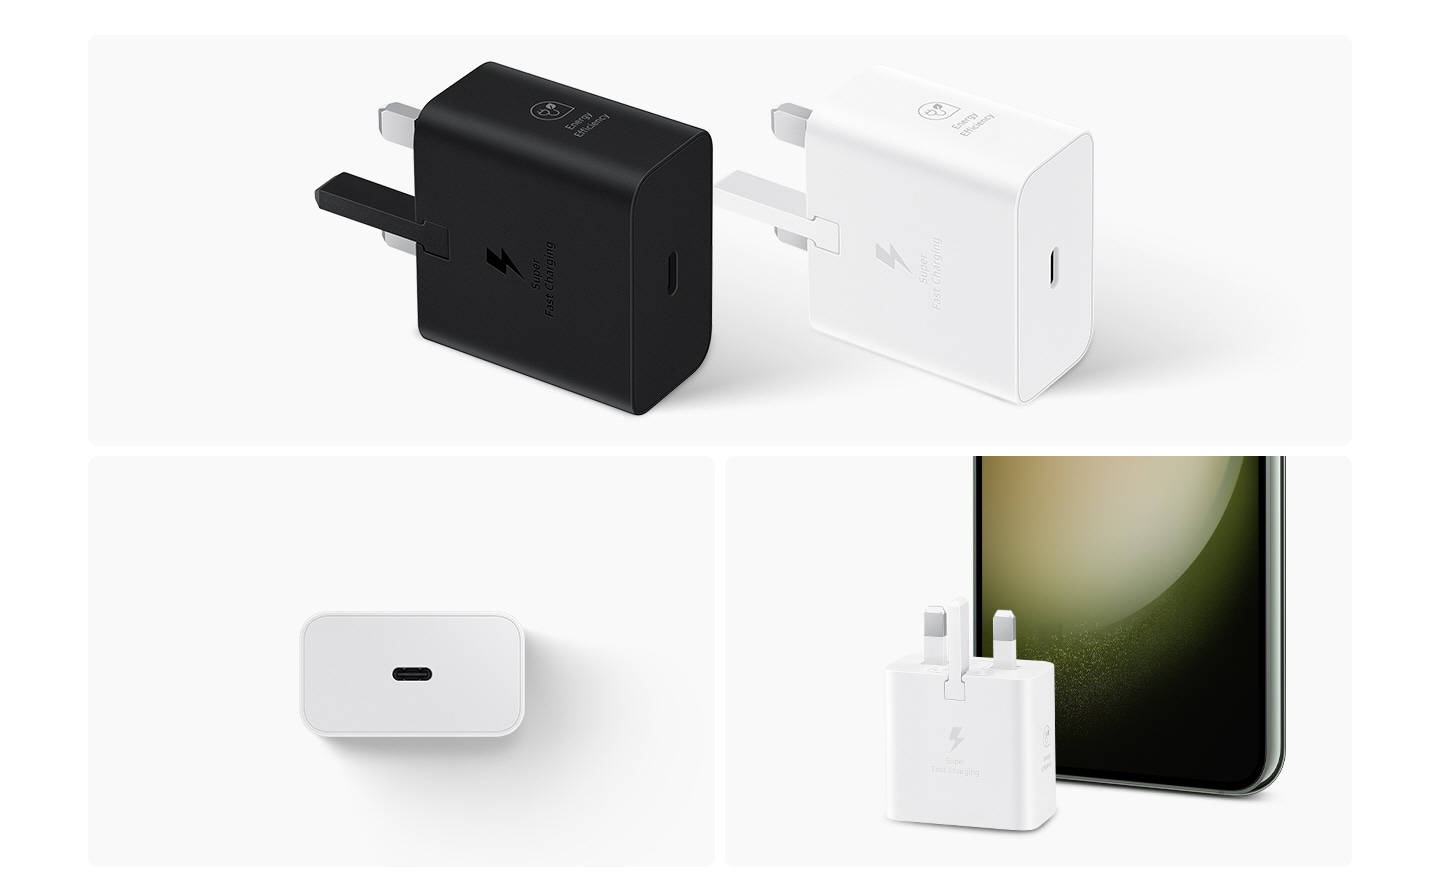 At the top, two Power Adapters, in black and white, are shown. To the bottom left, a white Power Adapter shows the side with the USB-C port. To the bottom right, a white Power Adapter is placed in front of a Galaxy smartphone device.